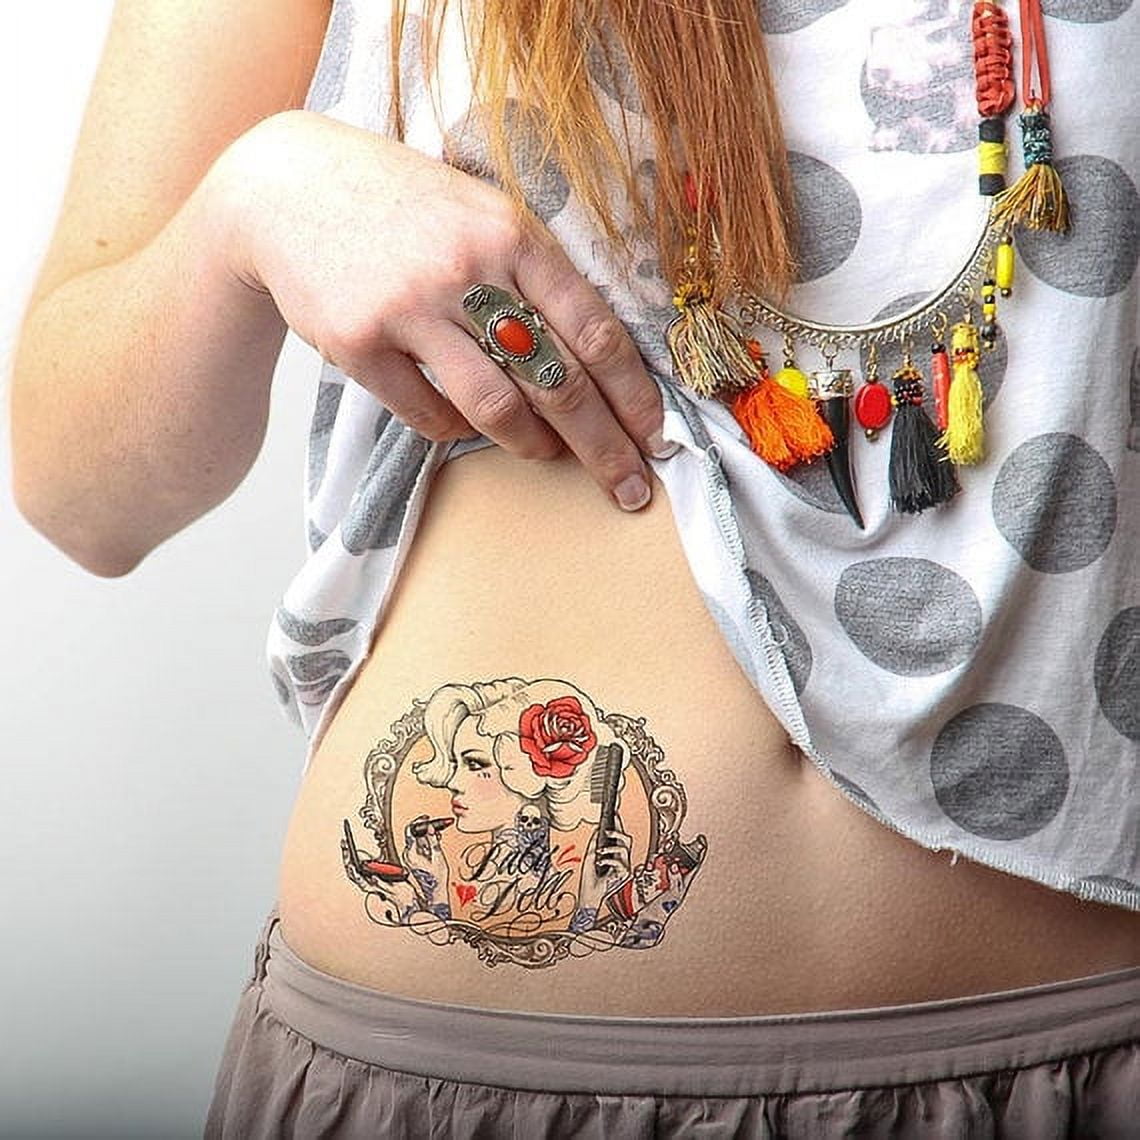 Tattooed Women - Who likes Stomach Tattoos on Woman? Photo... | Facebook